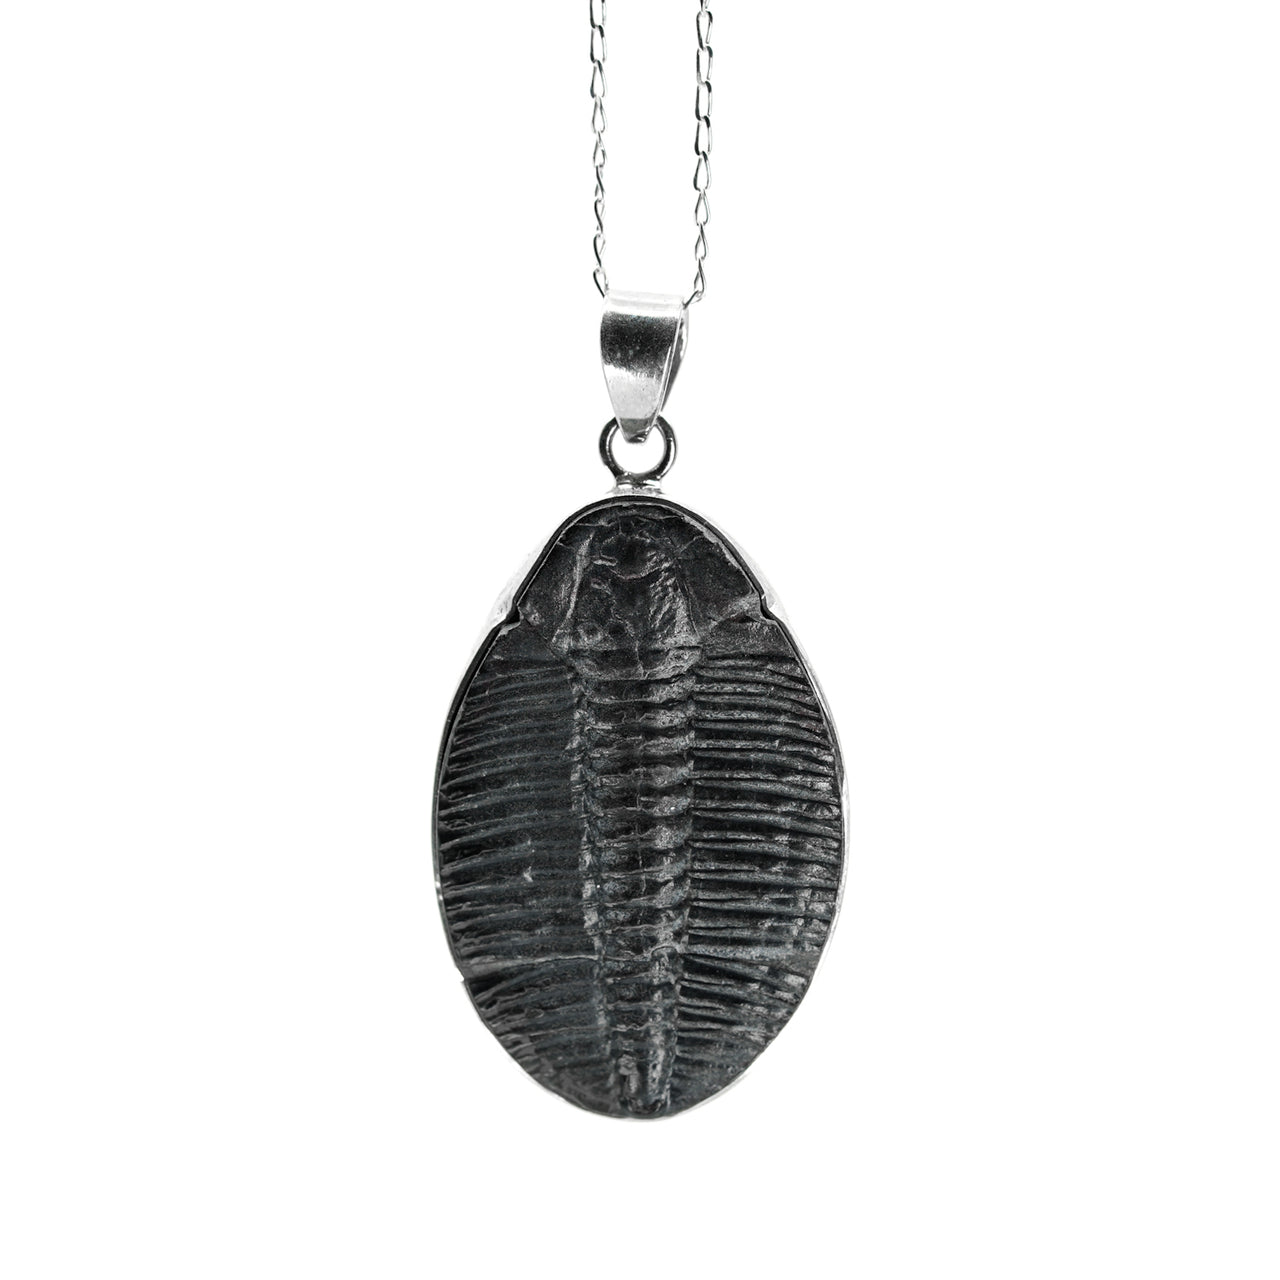 Large Genuine Trilobite as a pendant by Black Feather Design